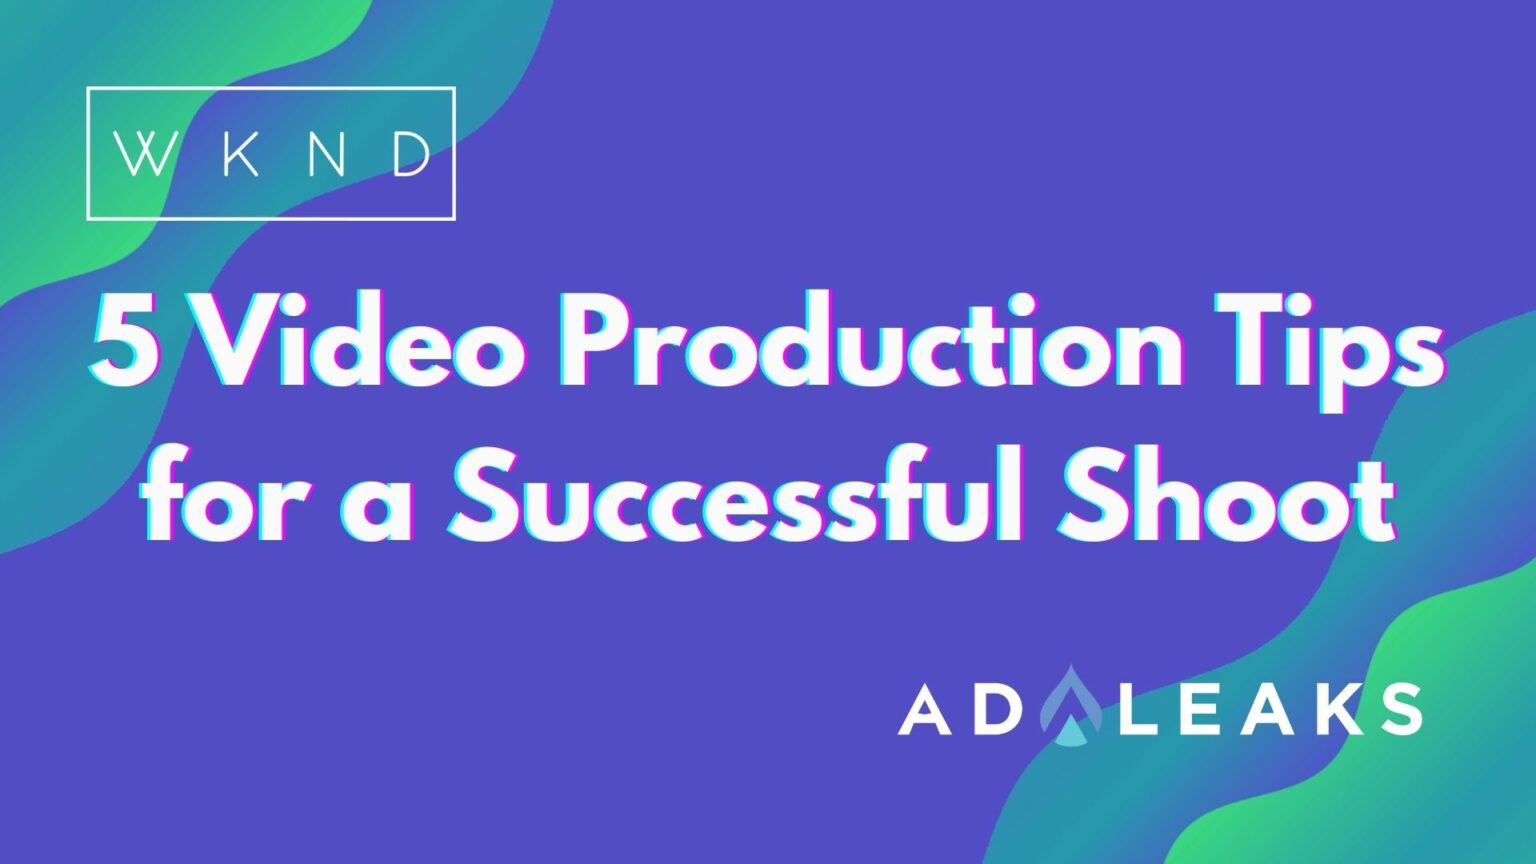 5 Video Production Tips for a Successful Shoot